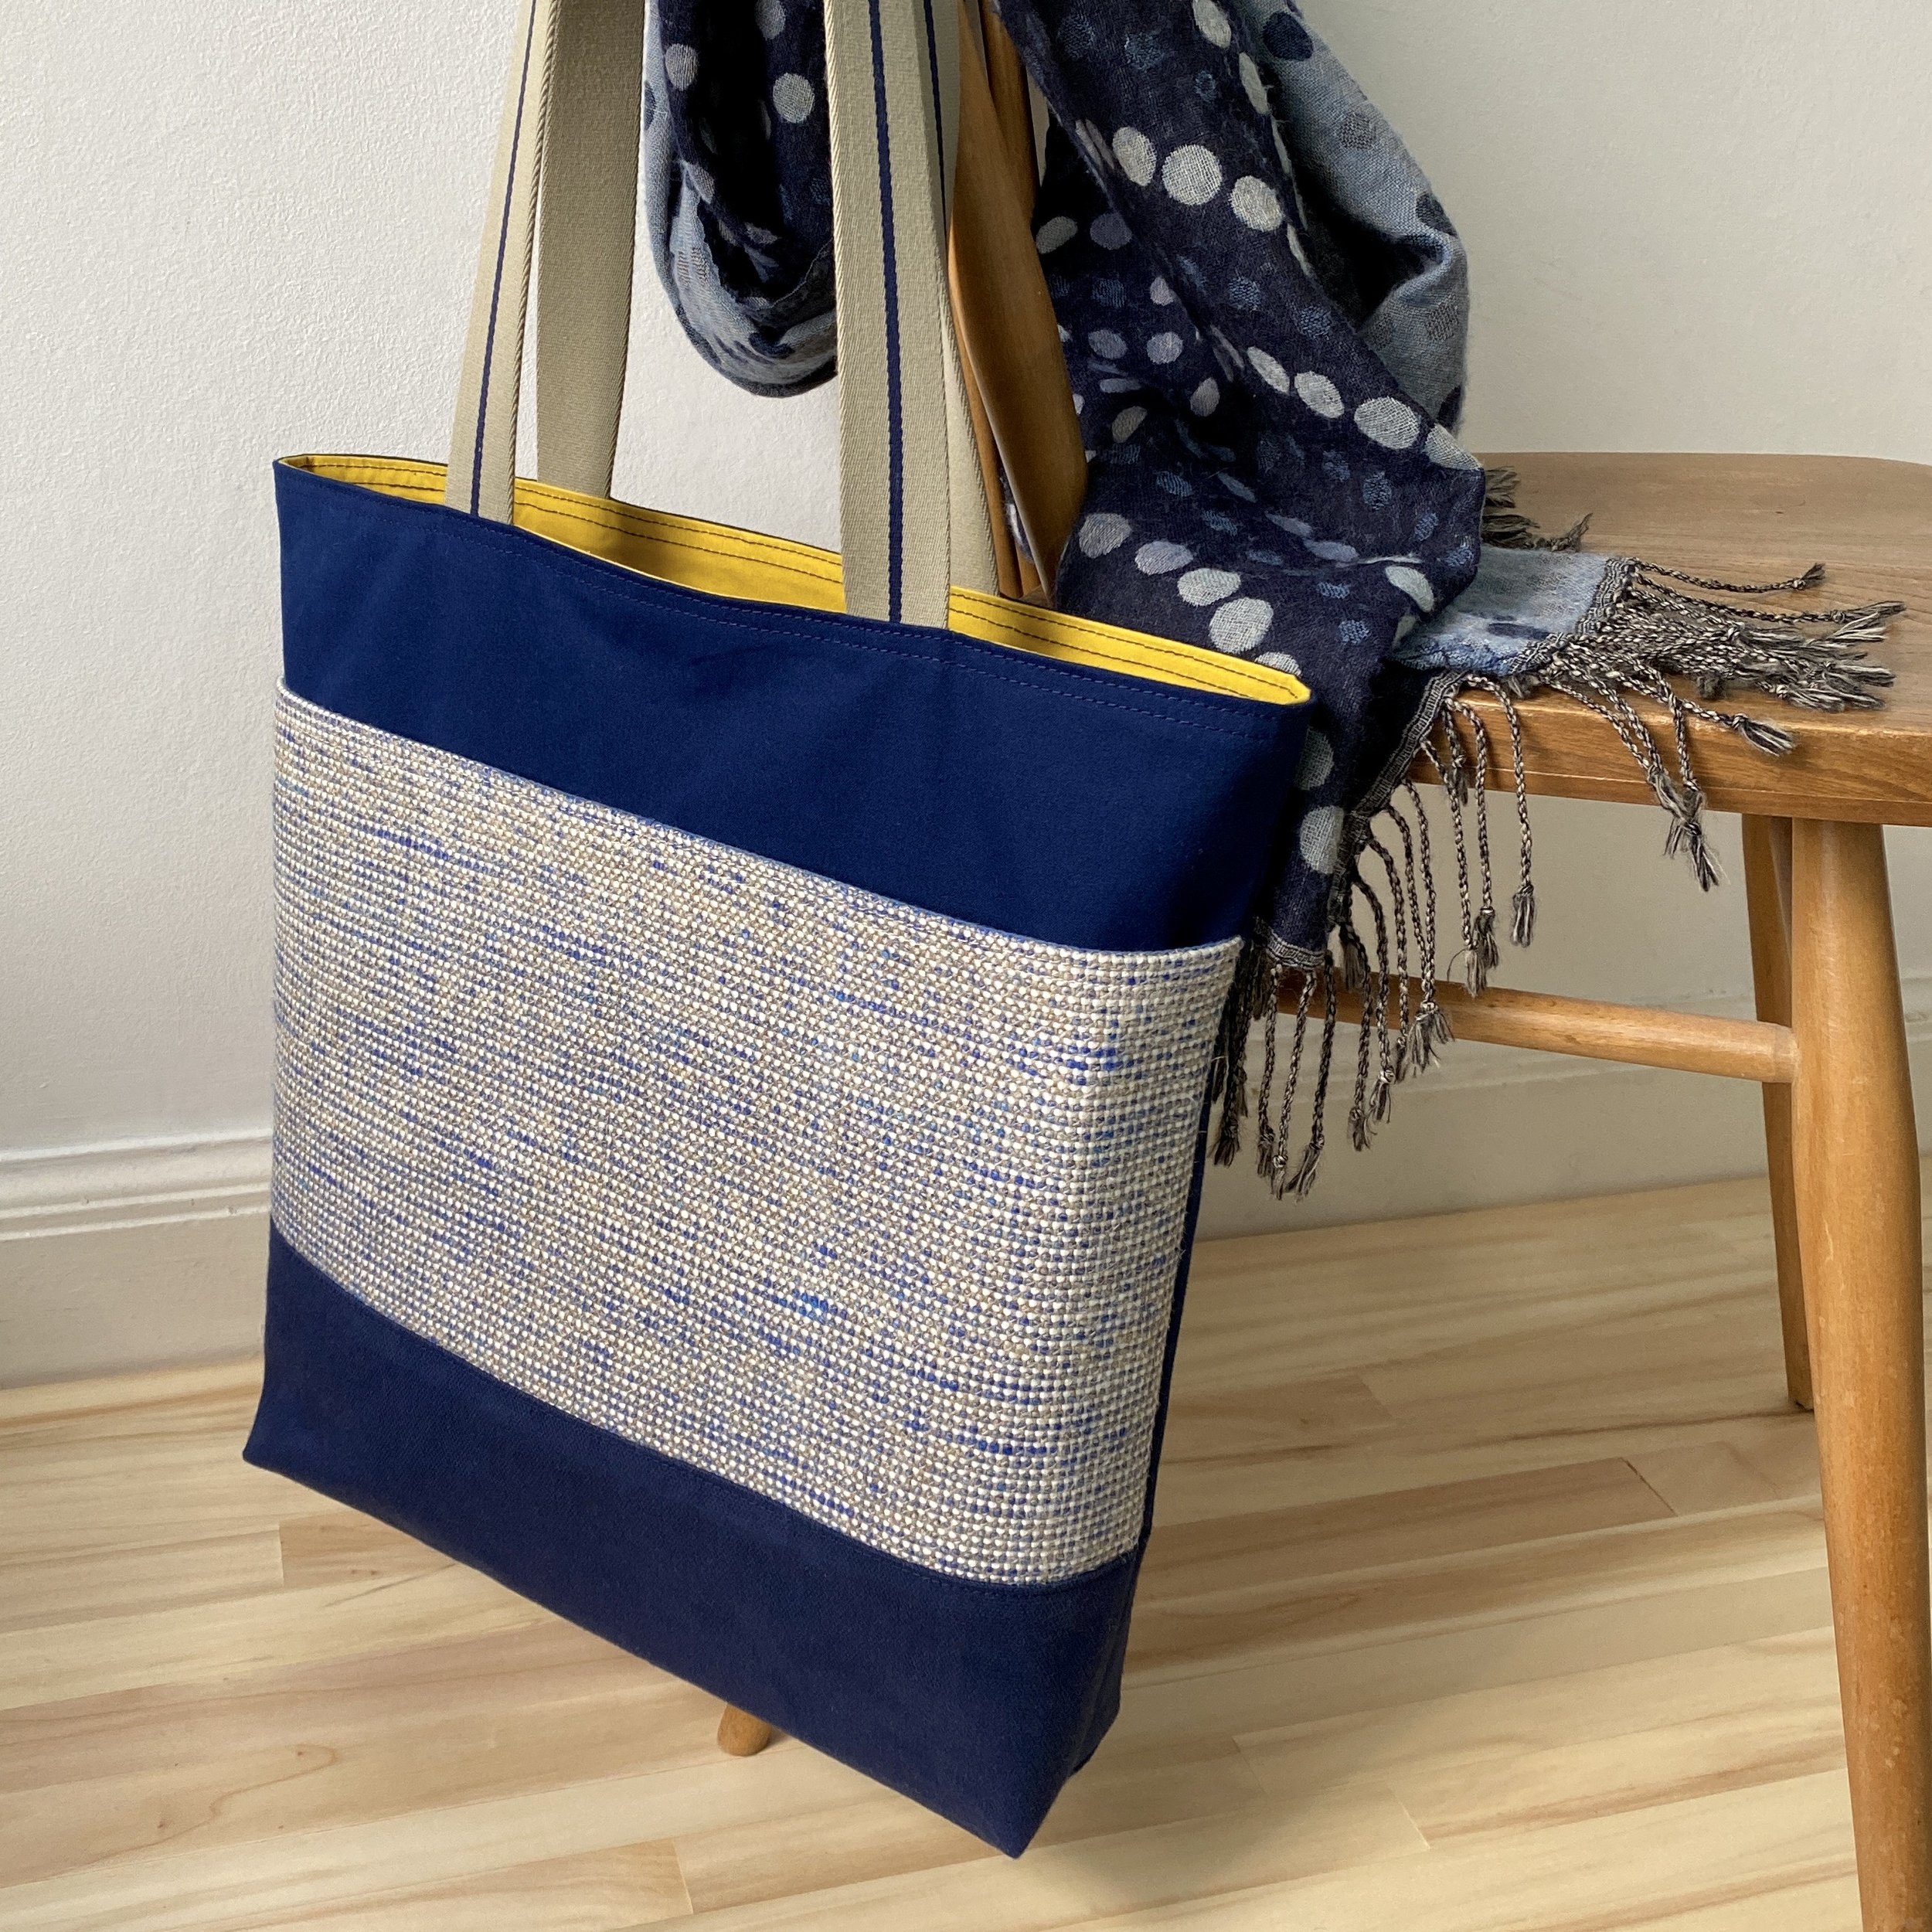 Royal Blue Dry Waxed Cotton & Scottish Linen Tote Bag hanging on chair | Mortar & Stitch.JPG